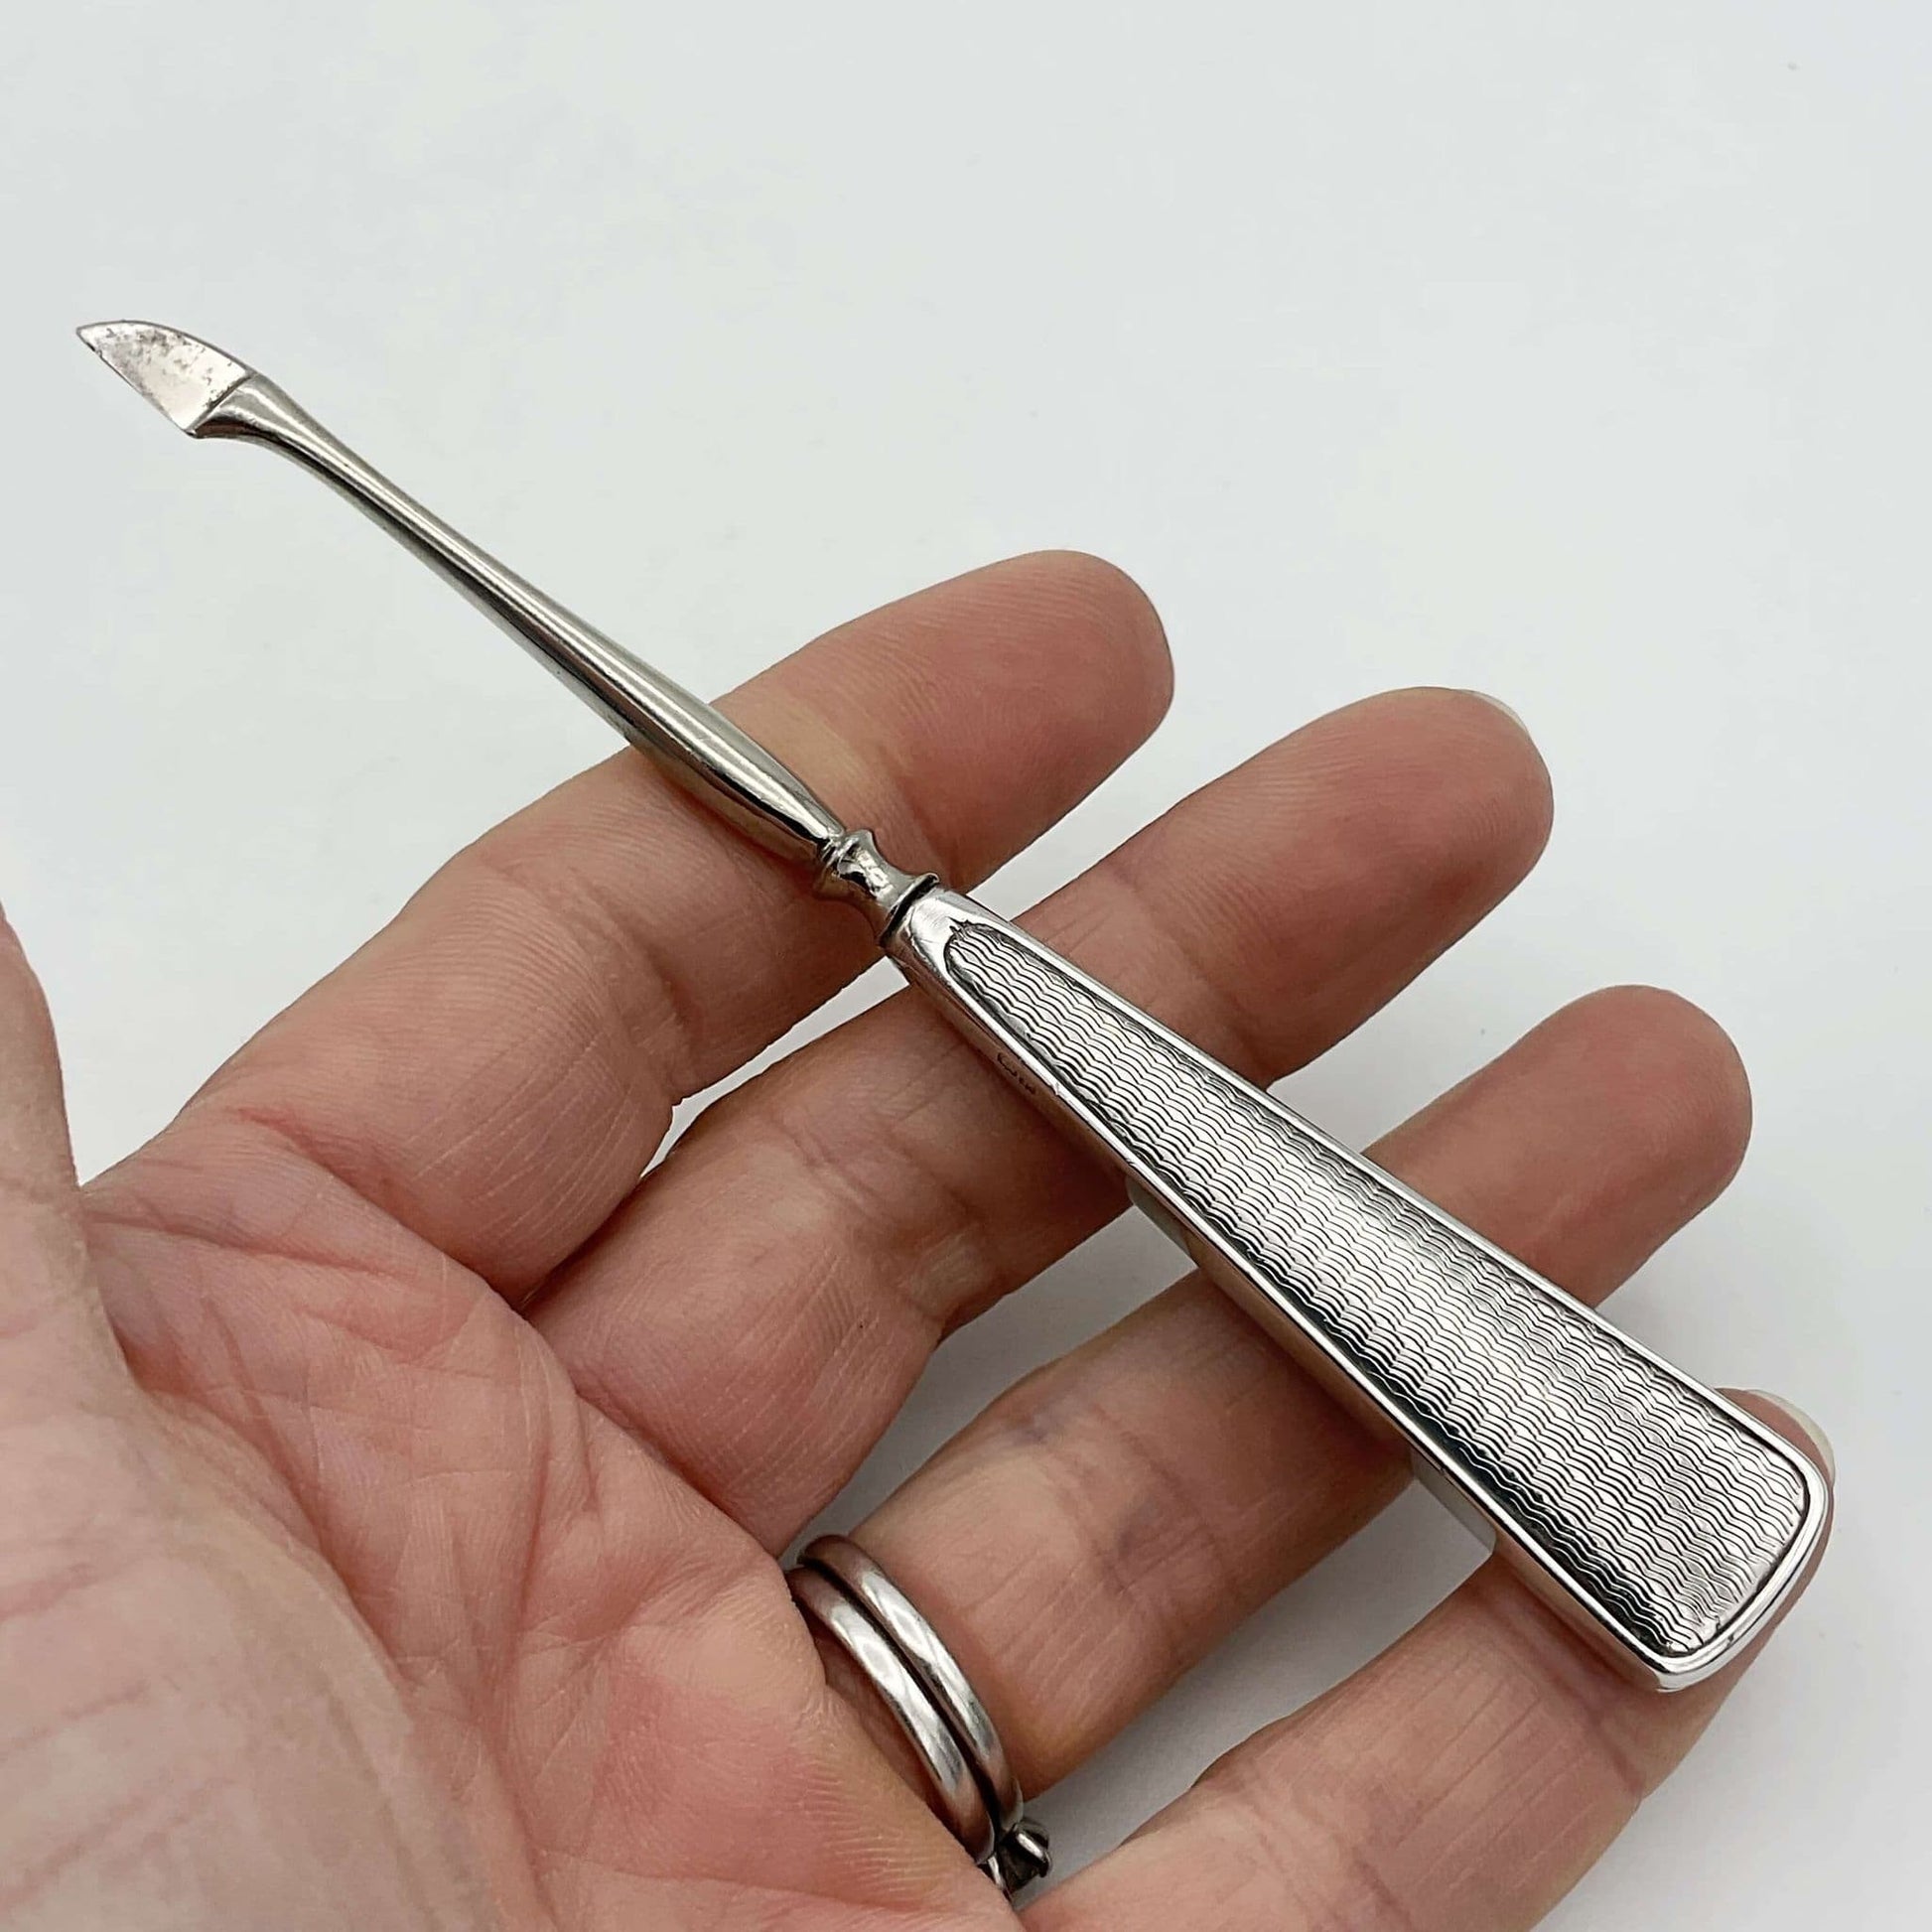 Vintage cuticle pusher held in a hand